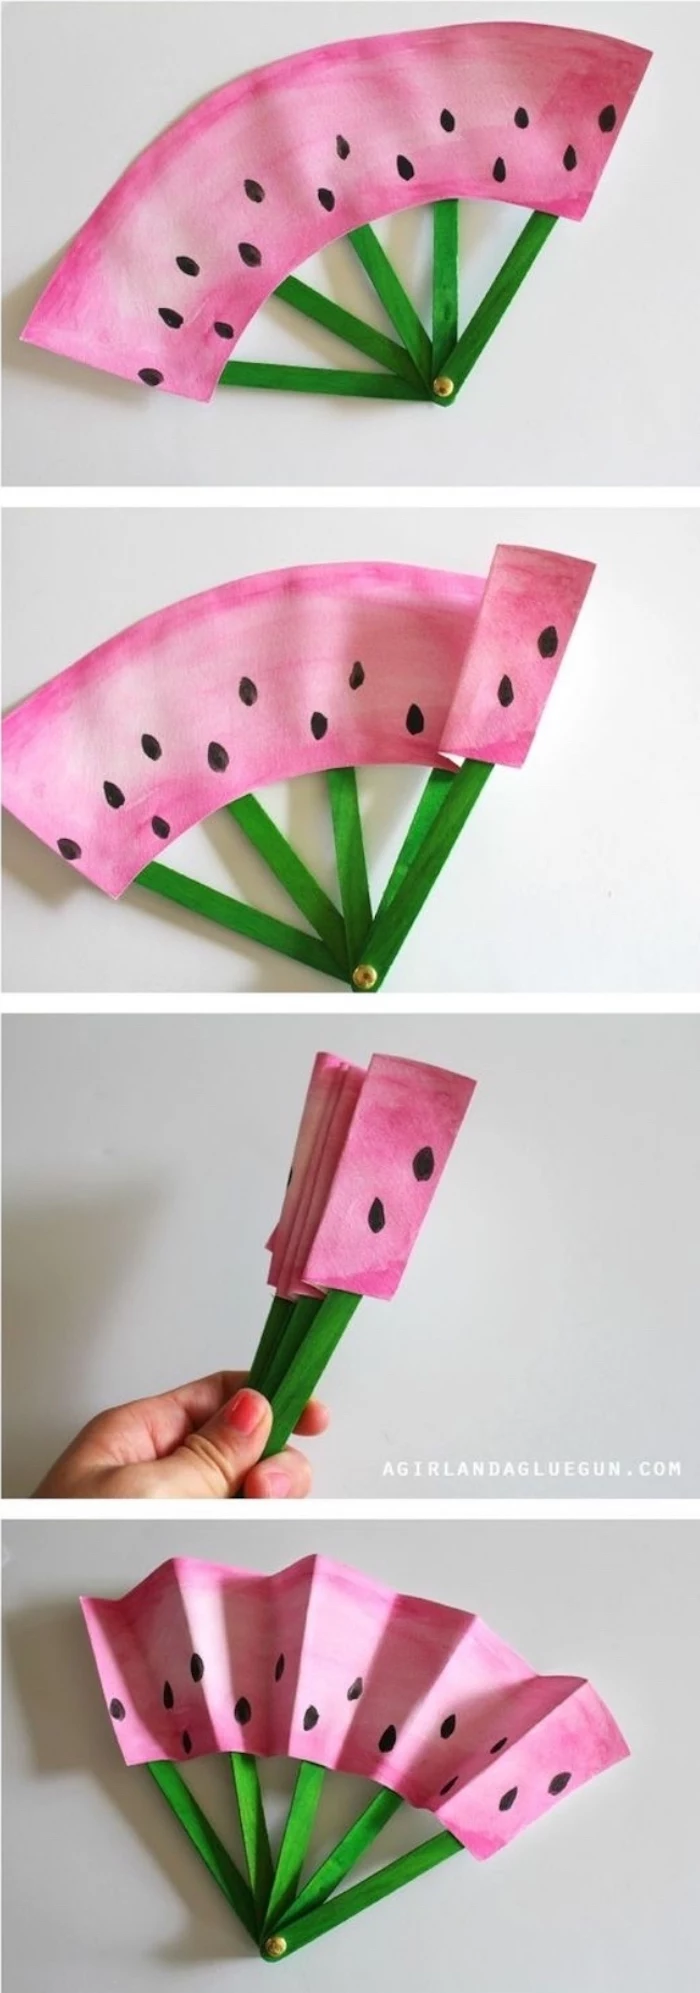 cool diy projects, paper fan, painted as a watermelon, wooden popsicle sticks